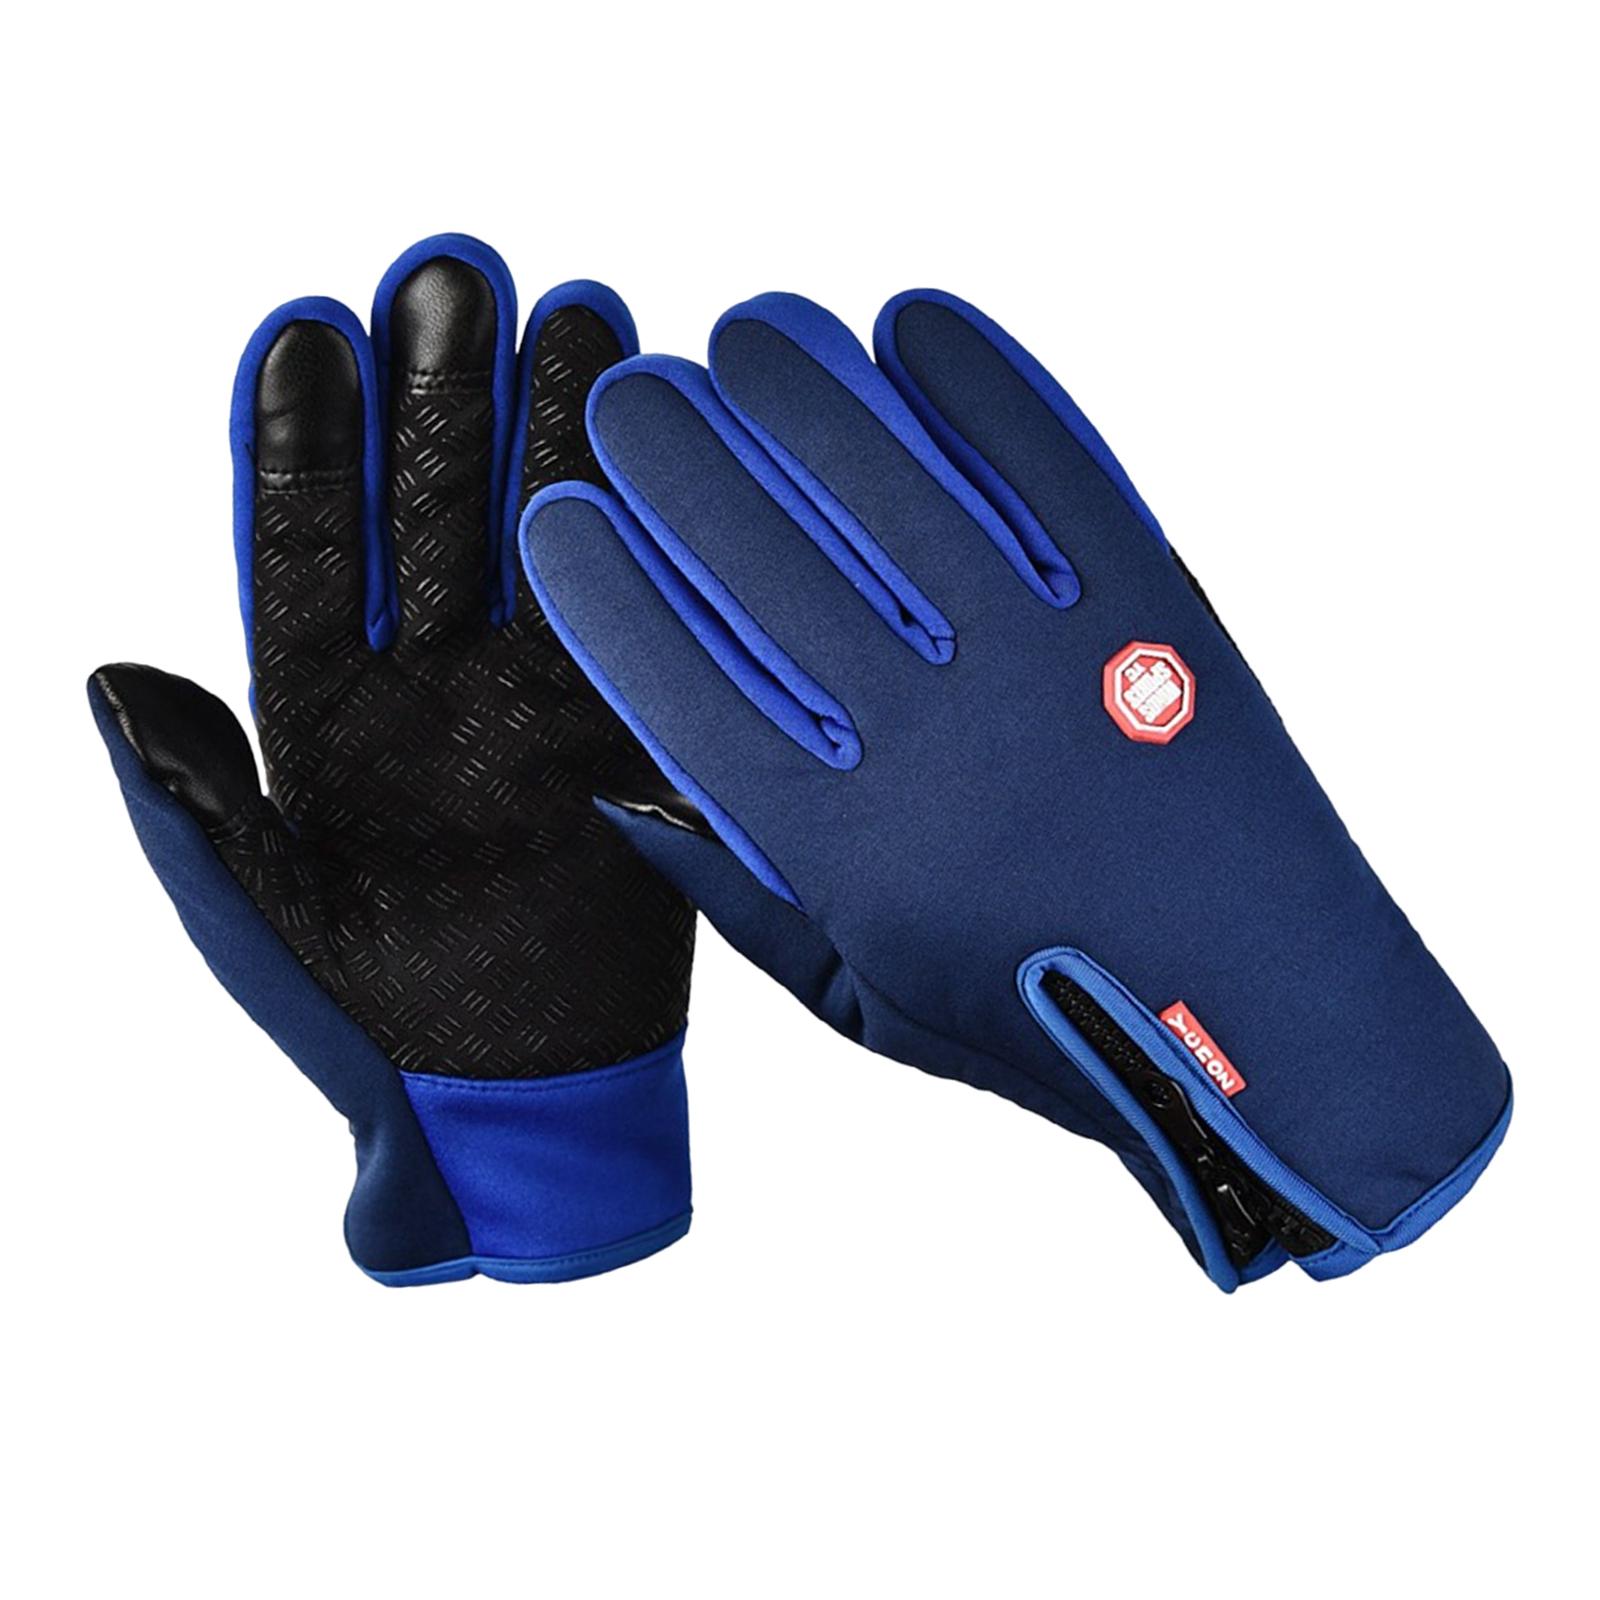 Winter Gloves Nonslip Thermal Gloves for Outdoor Running Sports Motorcycle XXL Blue